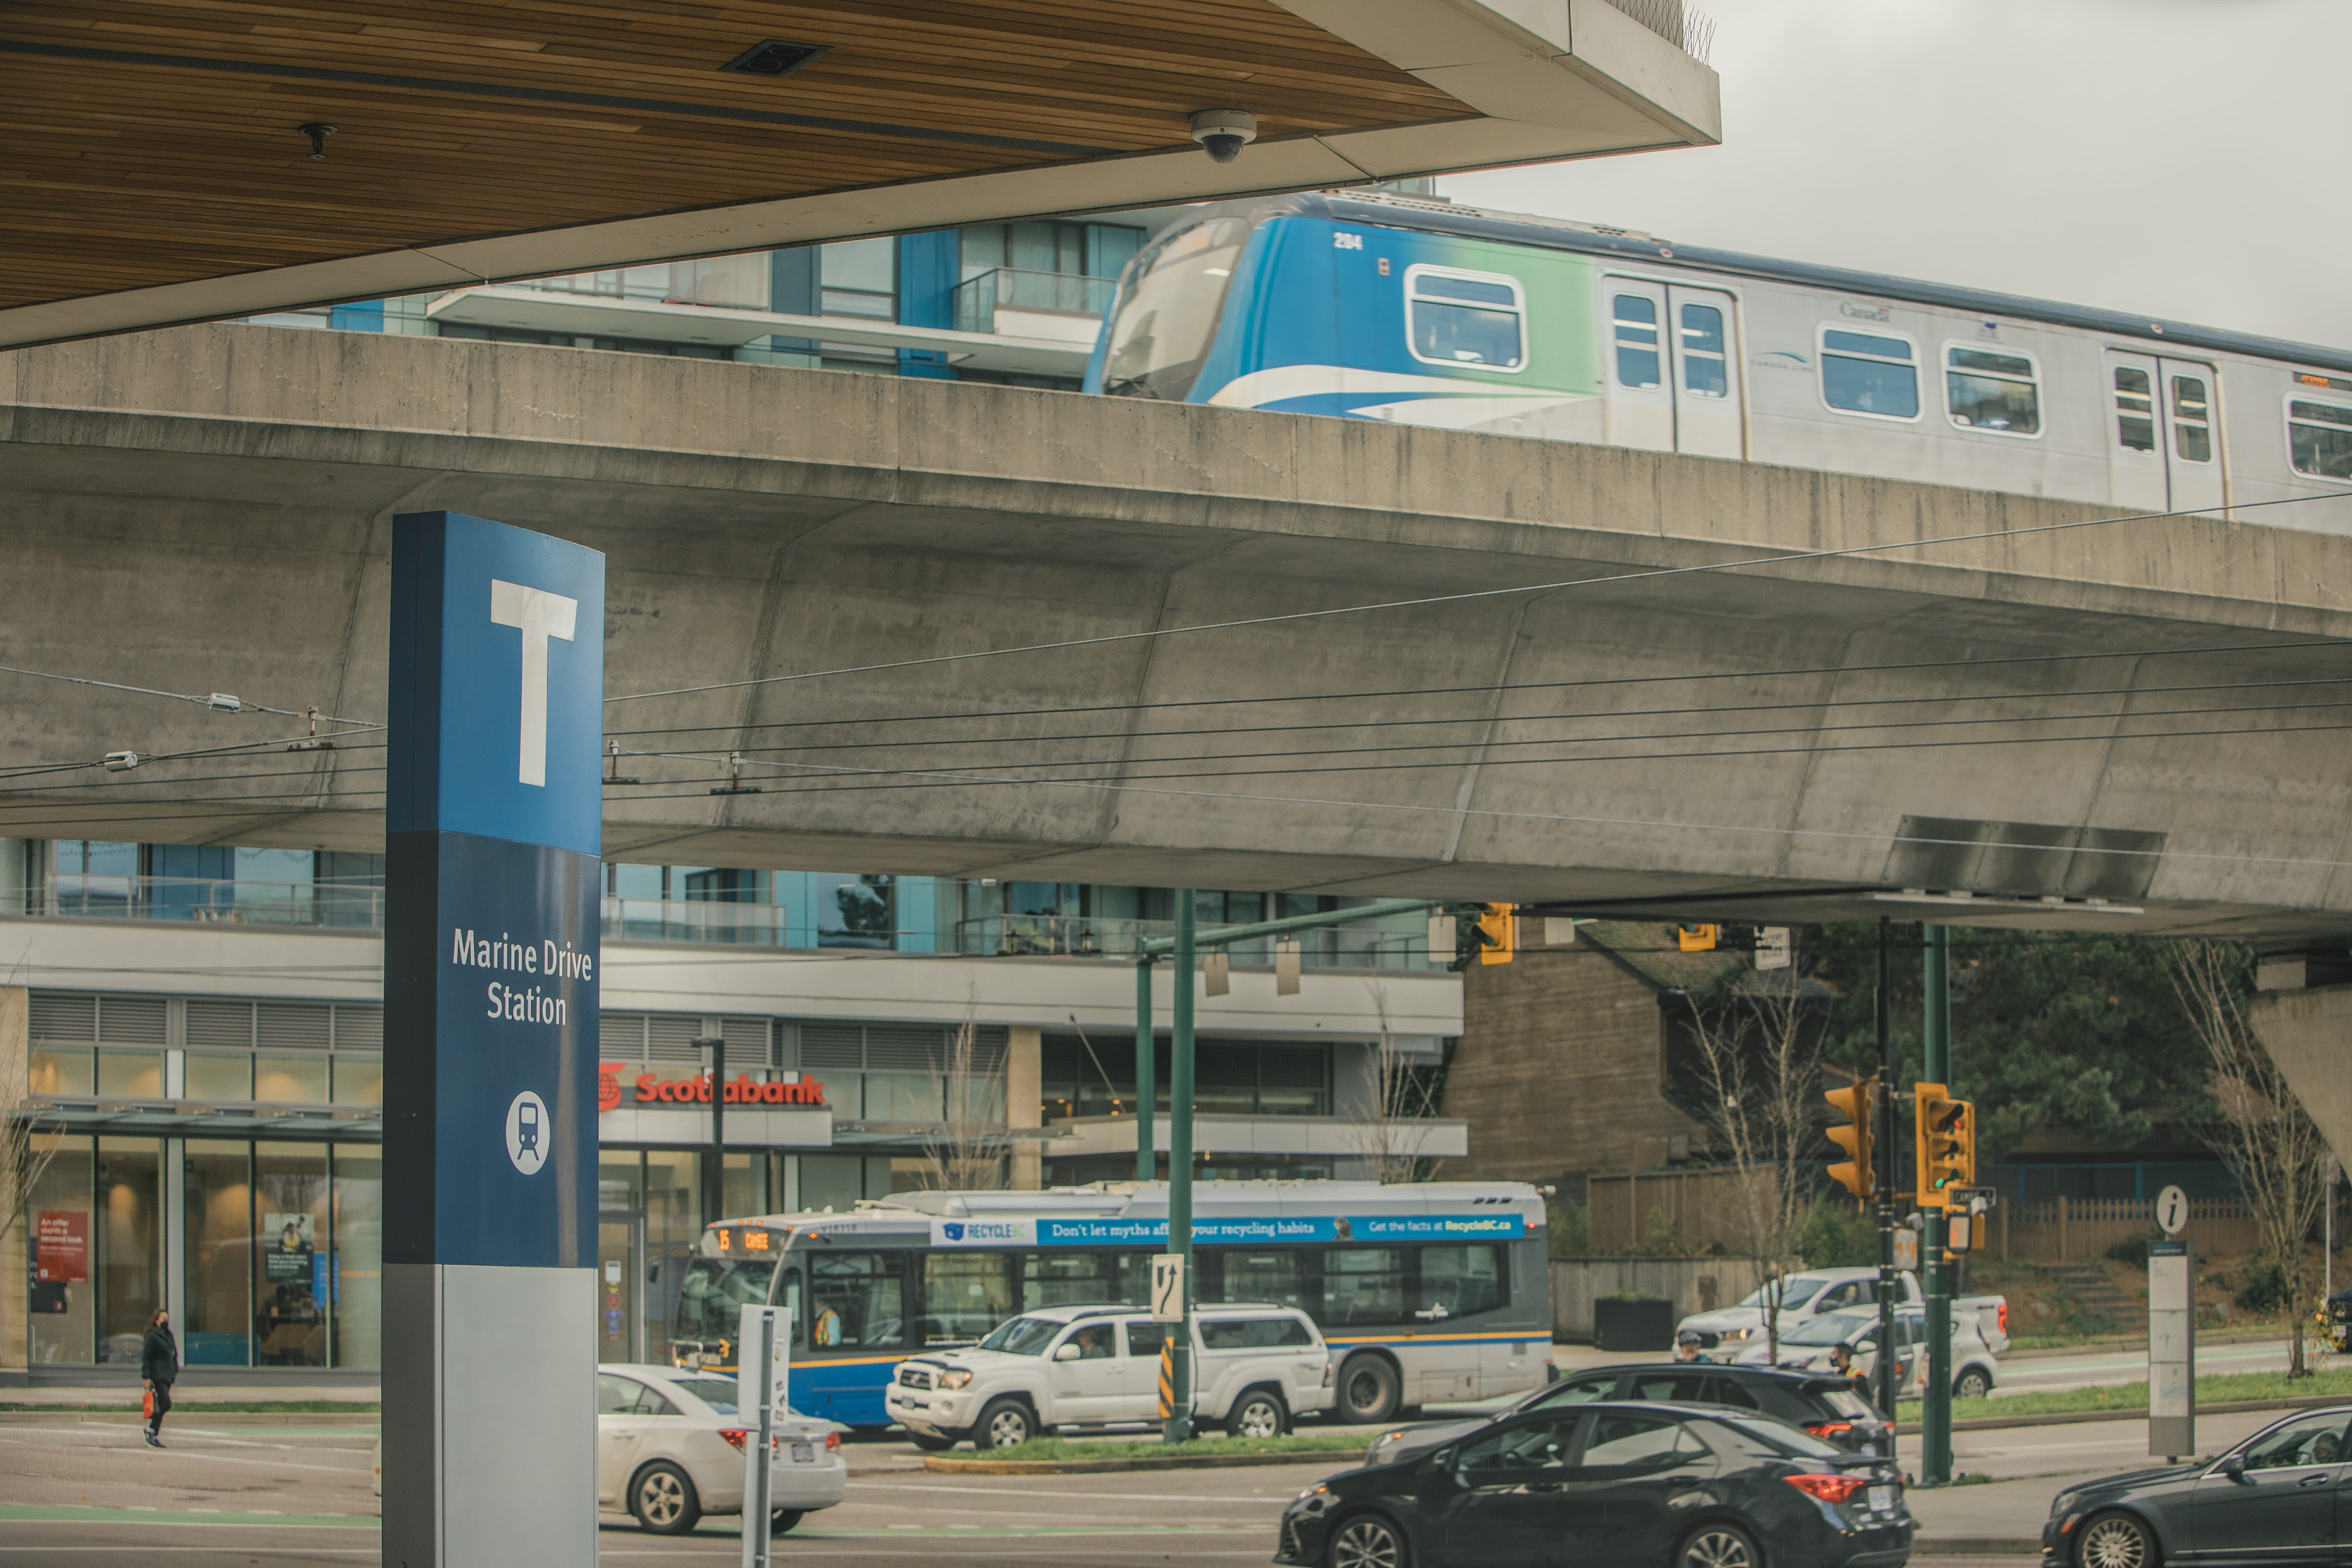 Canada Line and bus at Marine Drive Station